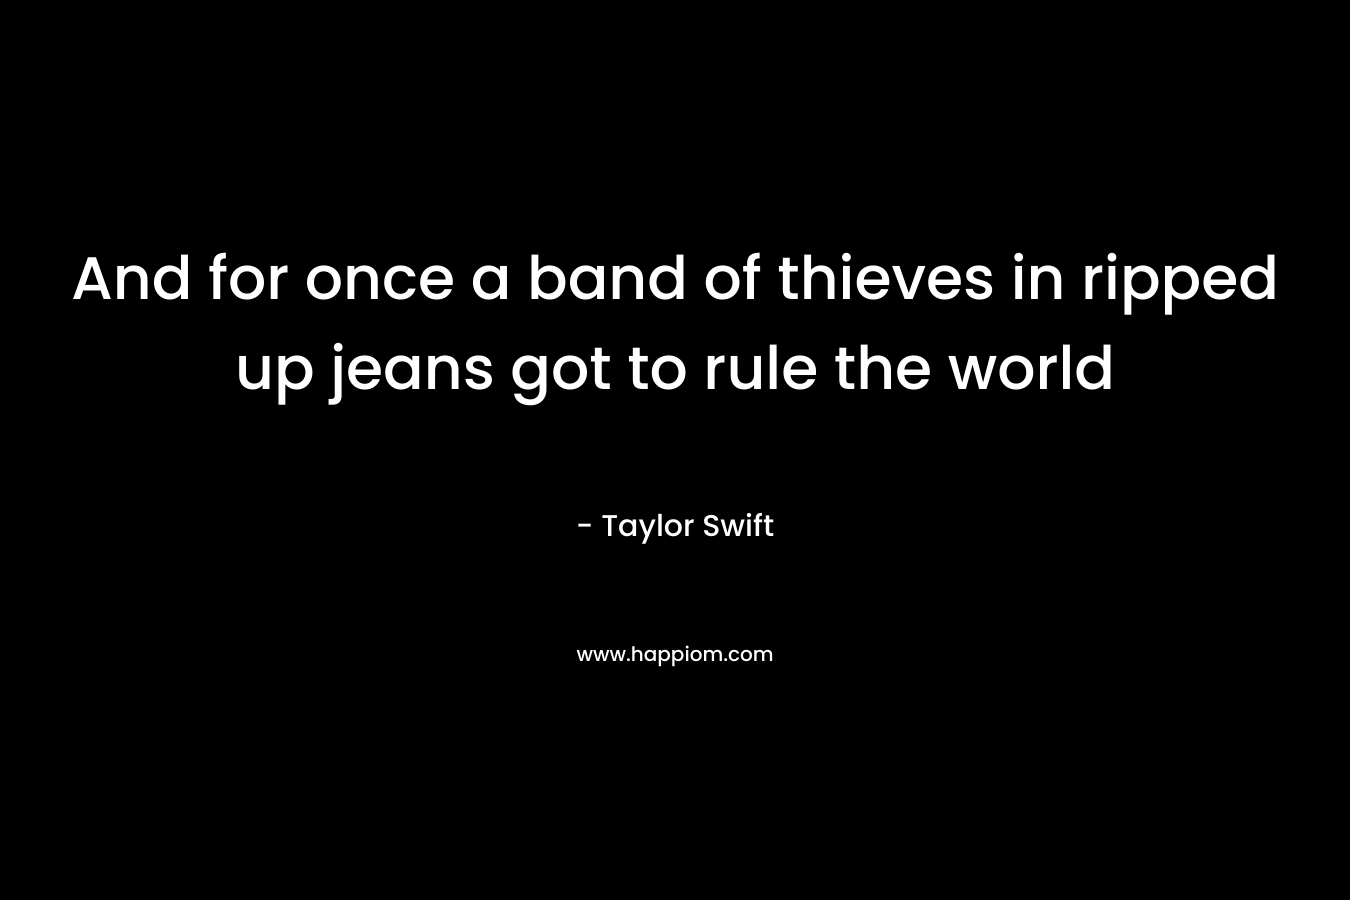 And for once a band of thieves in ripped up jeans got to rule the world